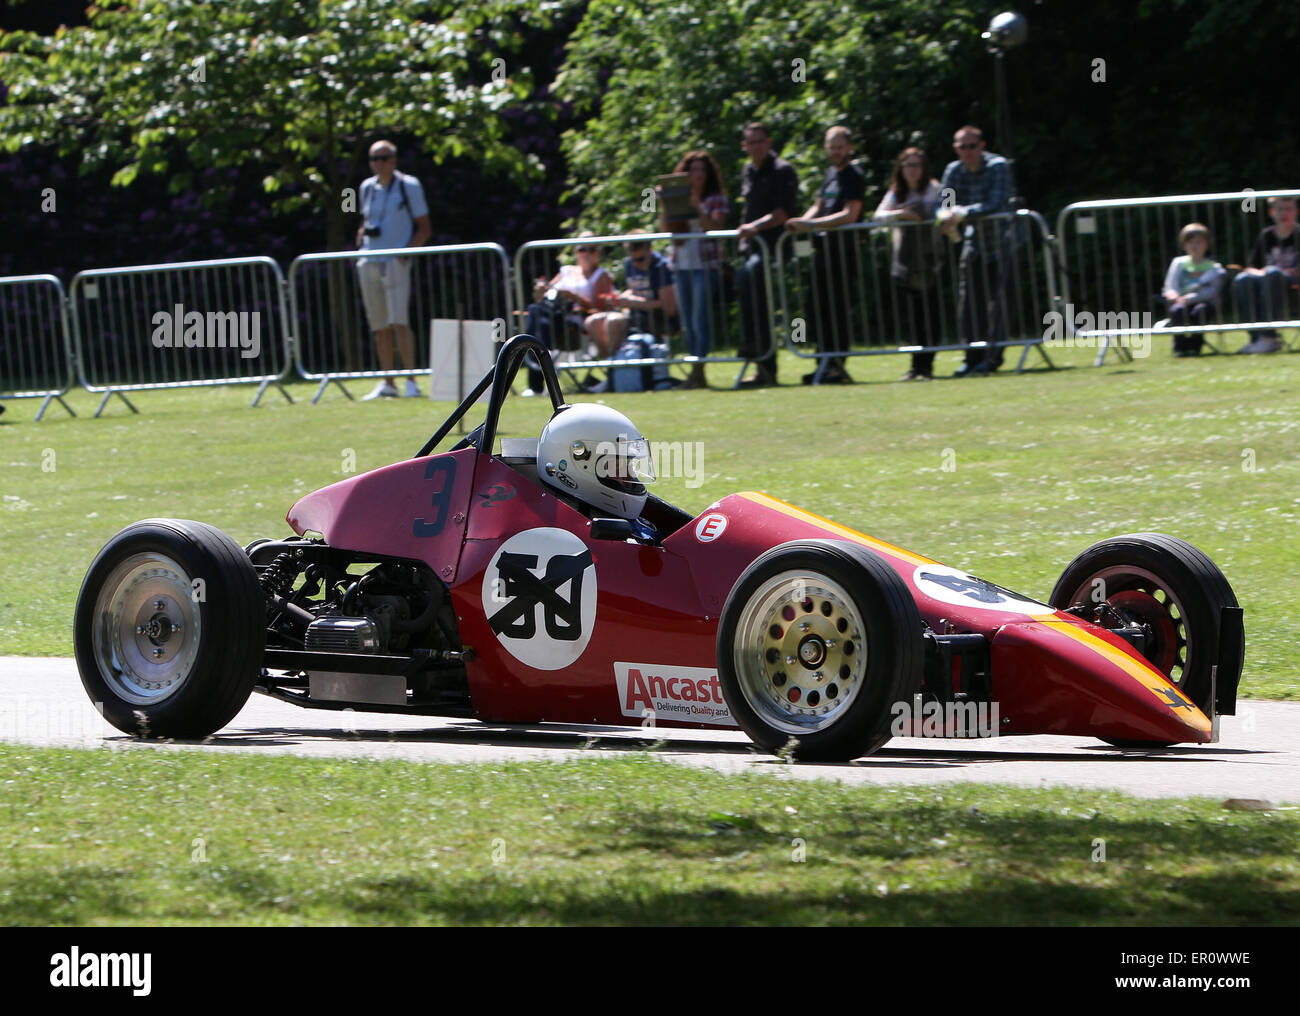 Contestants at this year's motor racing sprint event at Motorsport at the Palace in South London 24.05.2015 Stock Photo